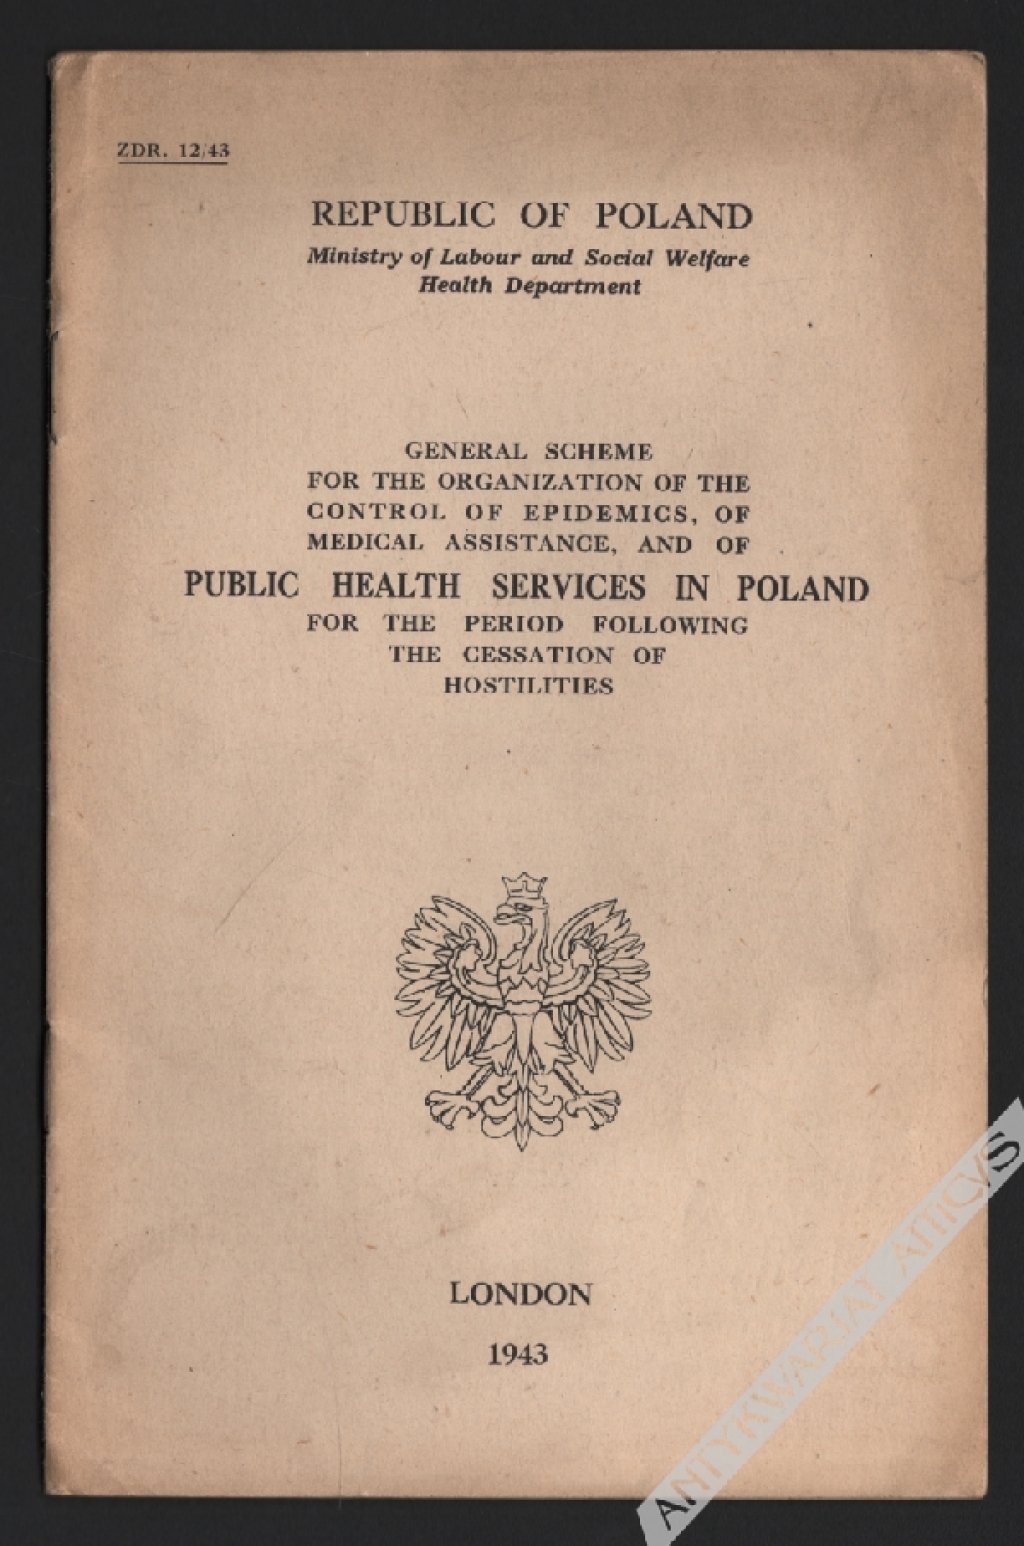 General scheme for the organization of the control of epidemics, of medical assistance, and of public health services in Poland for the period following the cessation of hostilities